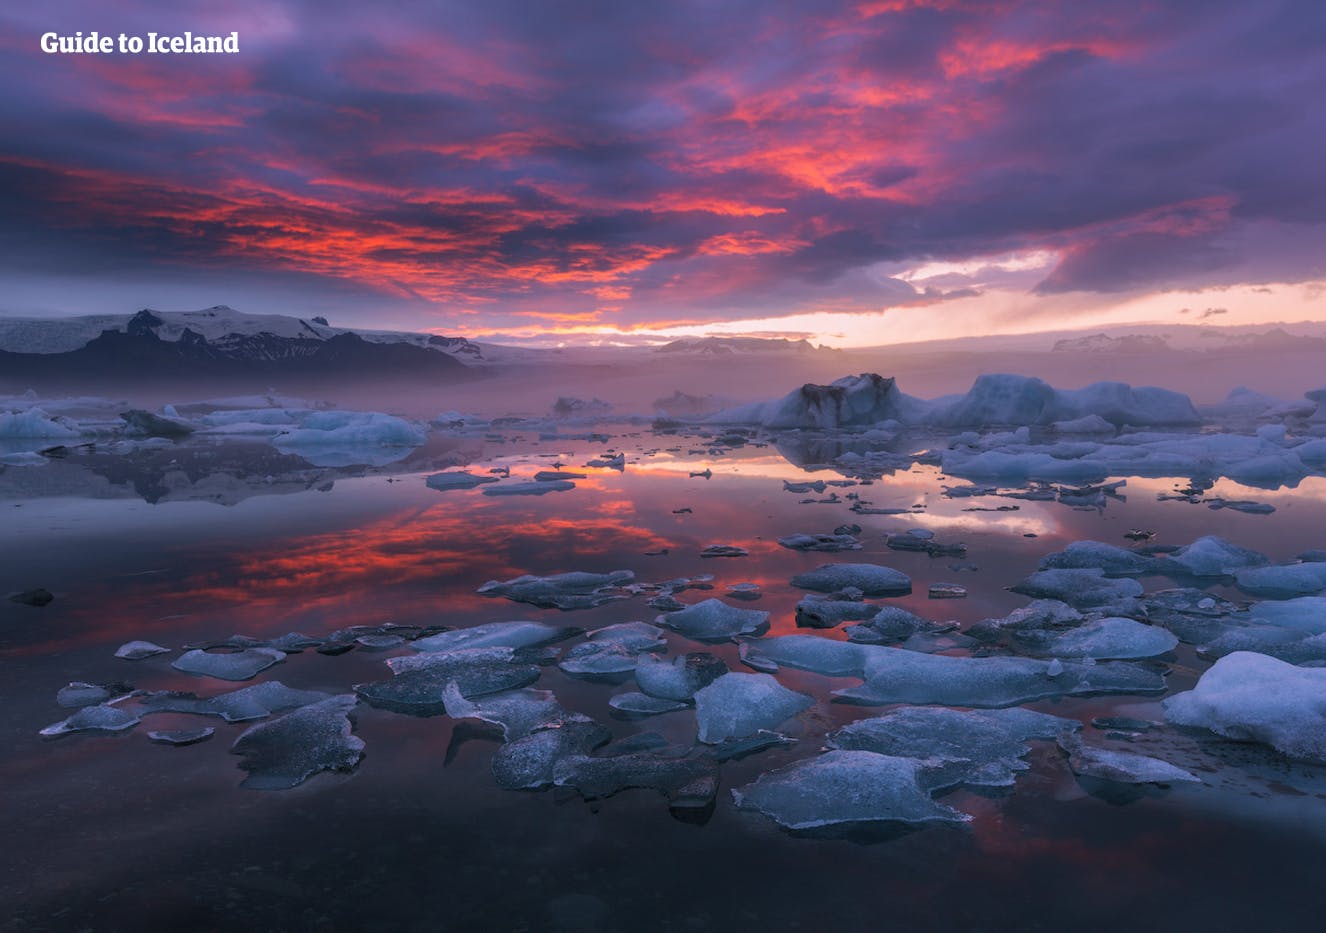 There's a reason that Jökulsárlón glacier lagoon has been called the 'Crown Jewel of Iceland'.